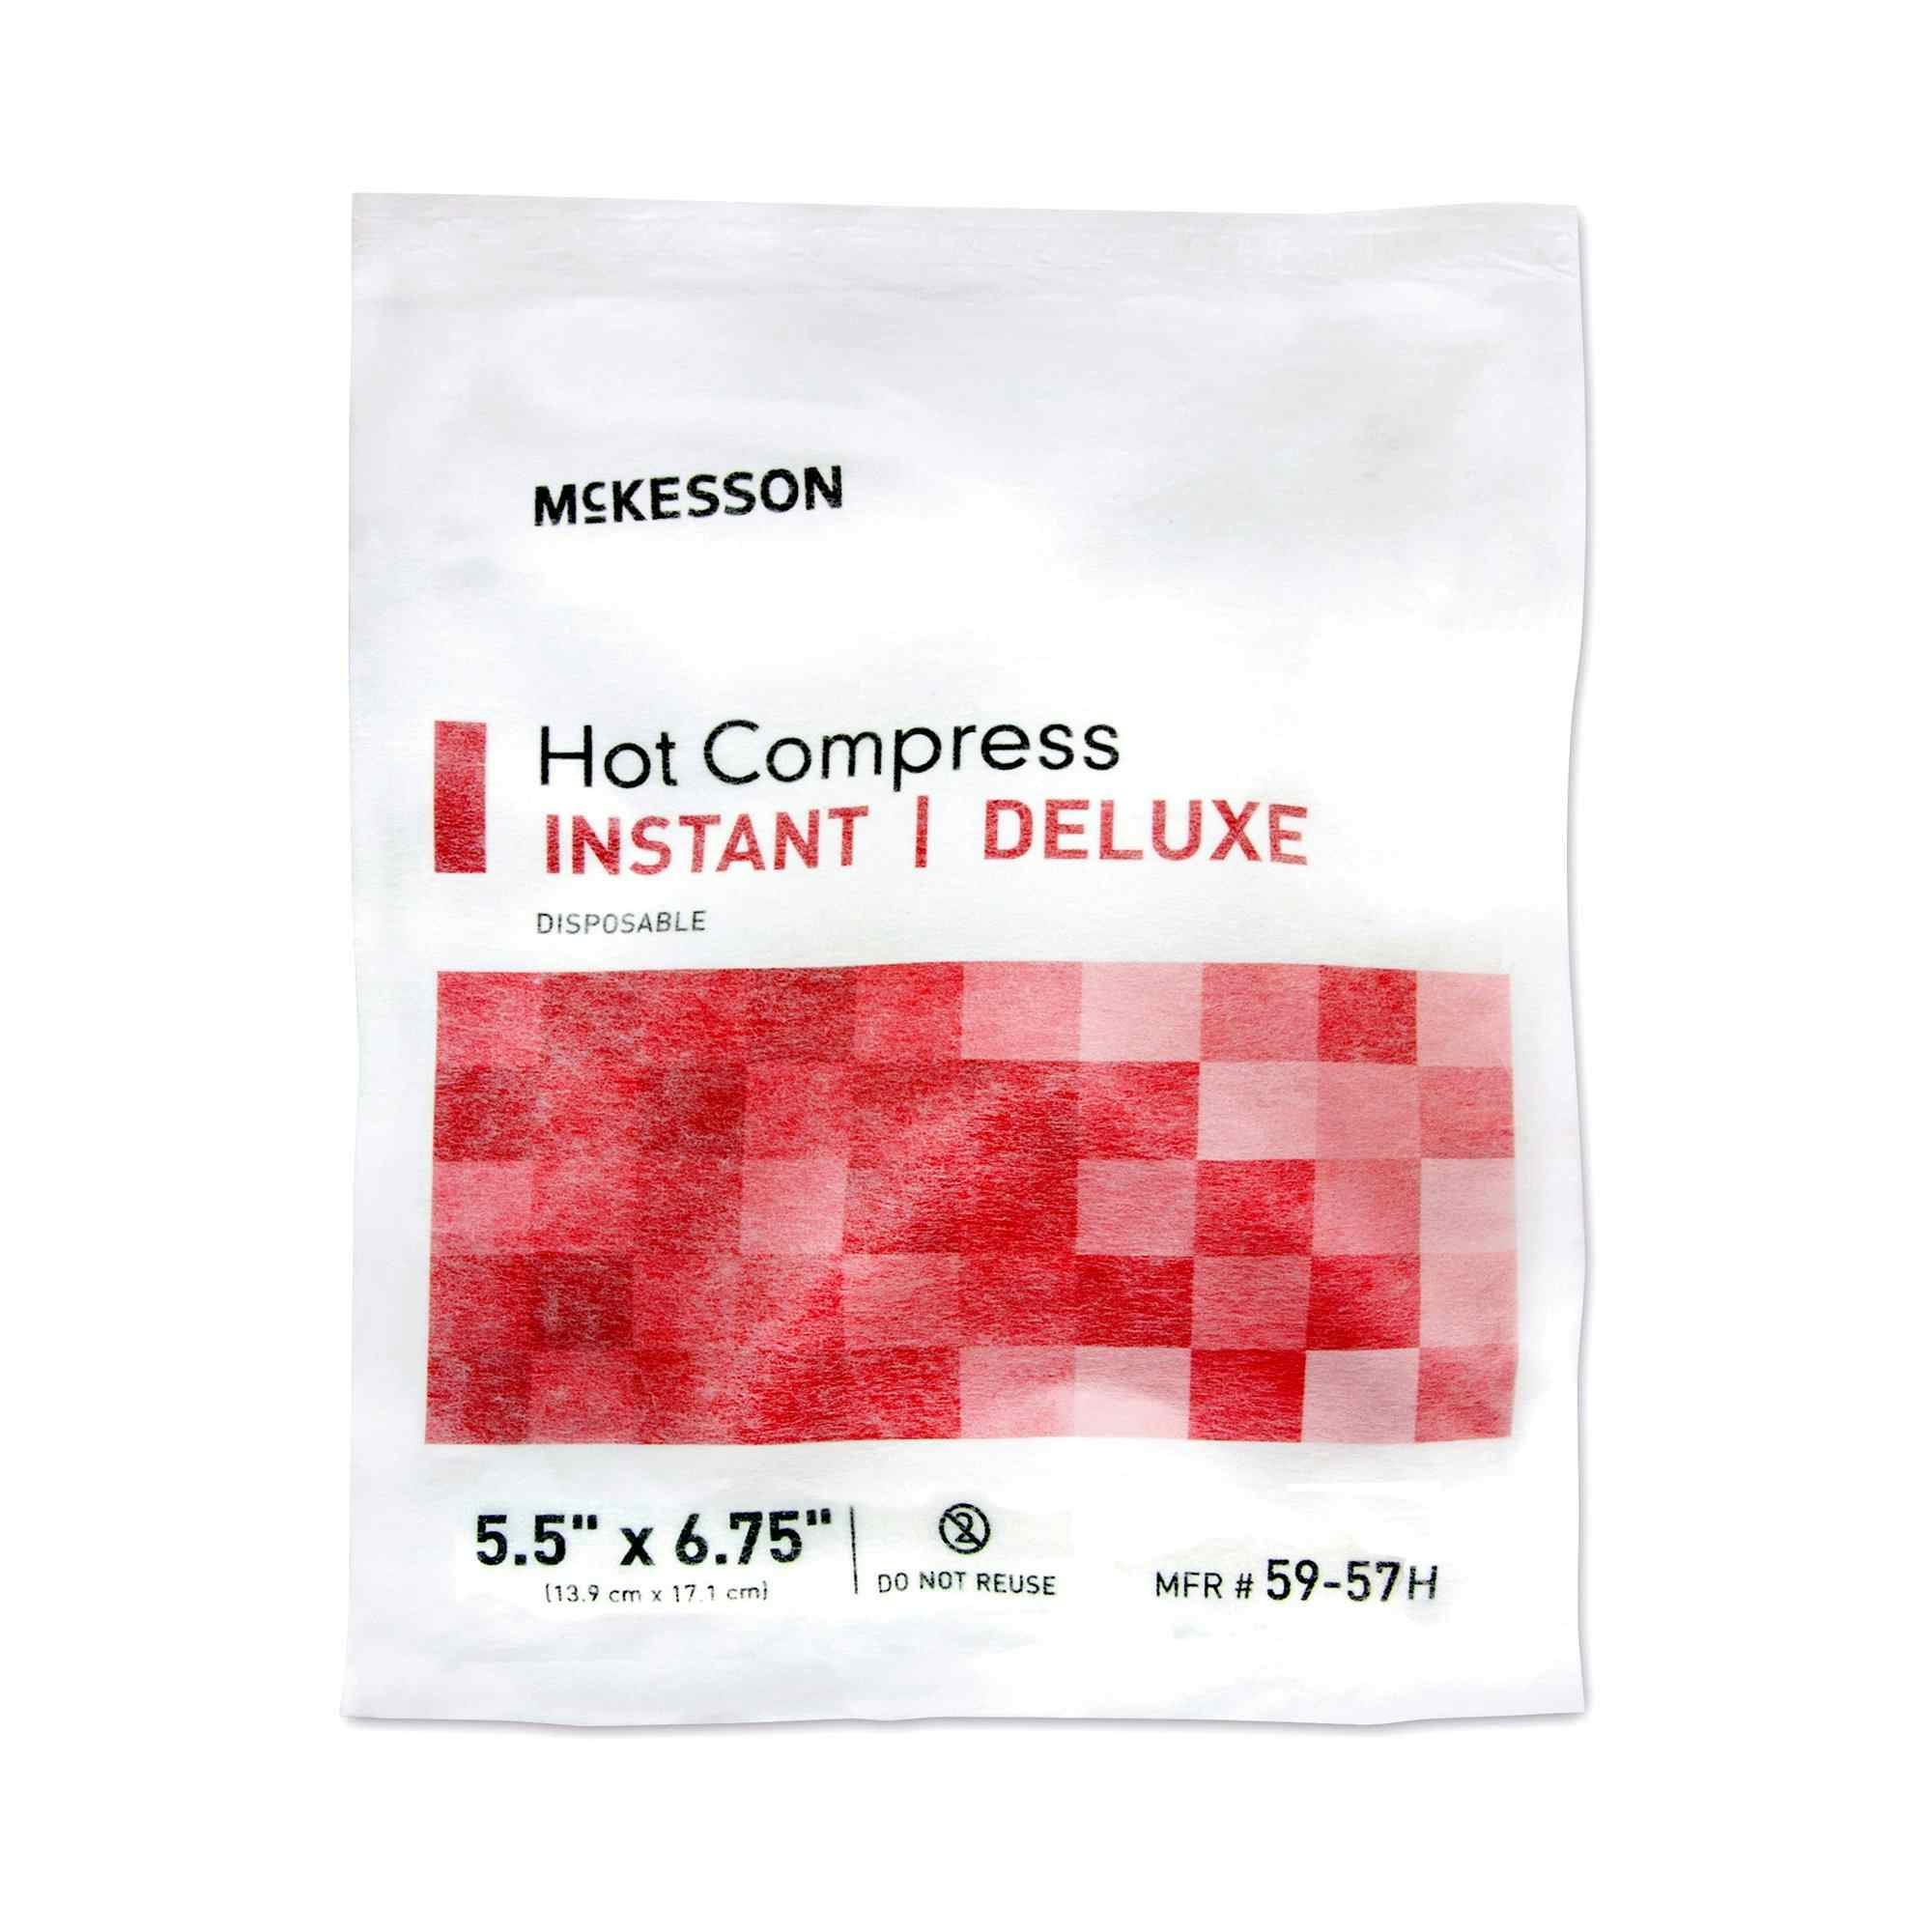 McKesson Instant Hot Compress Deluxe, 59-57H, Small - Case of 24